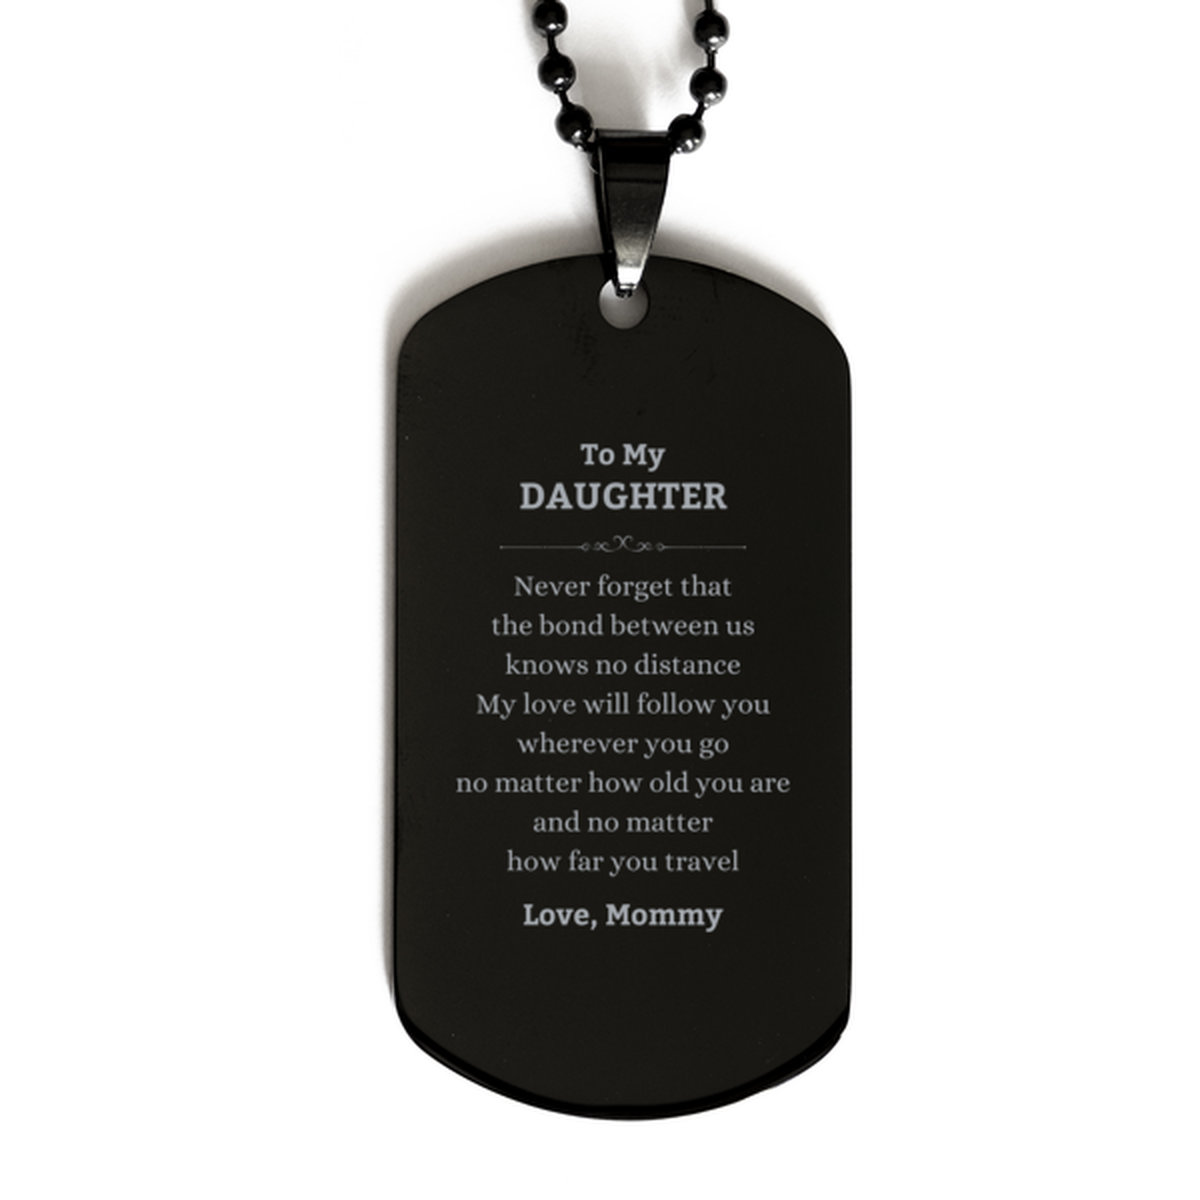 Daughter Birthday Gifts from Mommy, Adjustable Black Dog Tag for Daughter Christmas Graduation Unique Gifts Daughter Never forget that the bond between us knows no distance. Love, Mommy